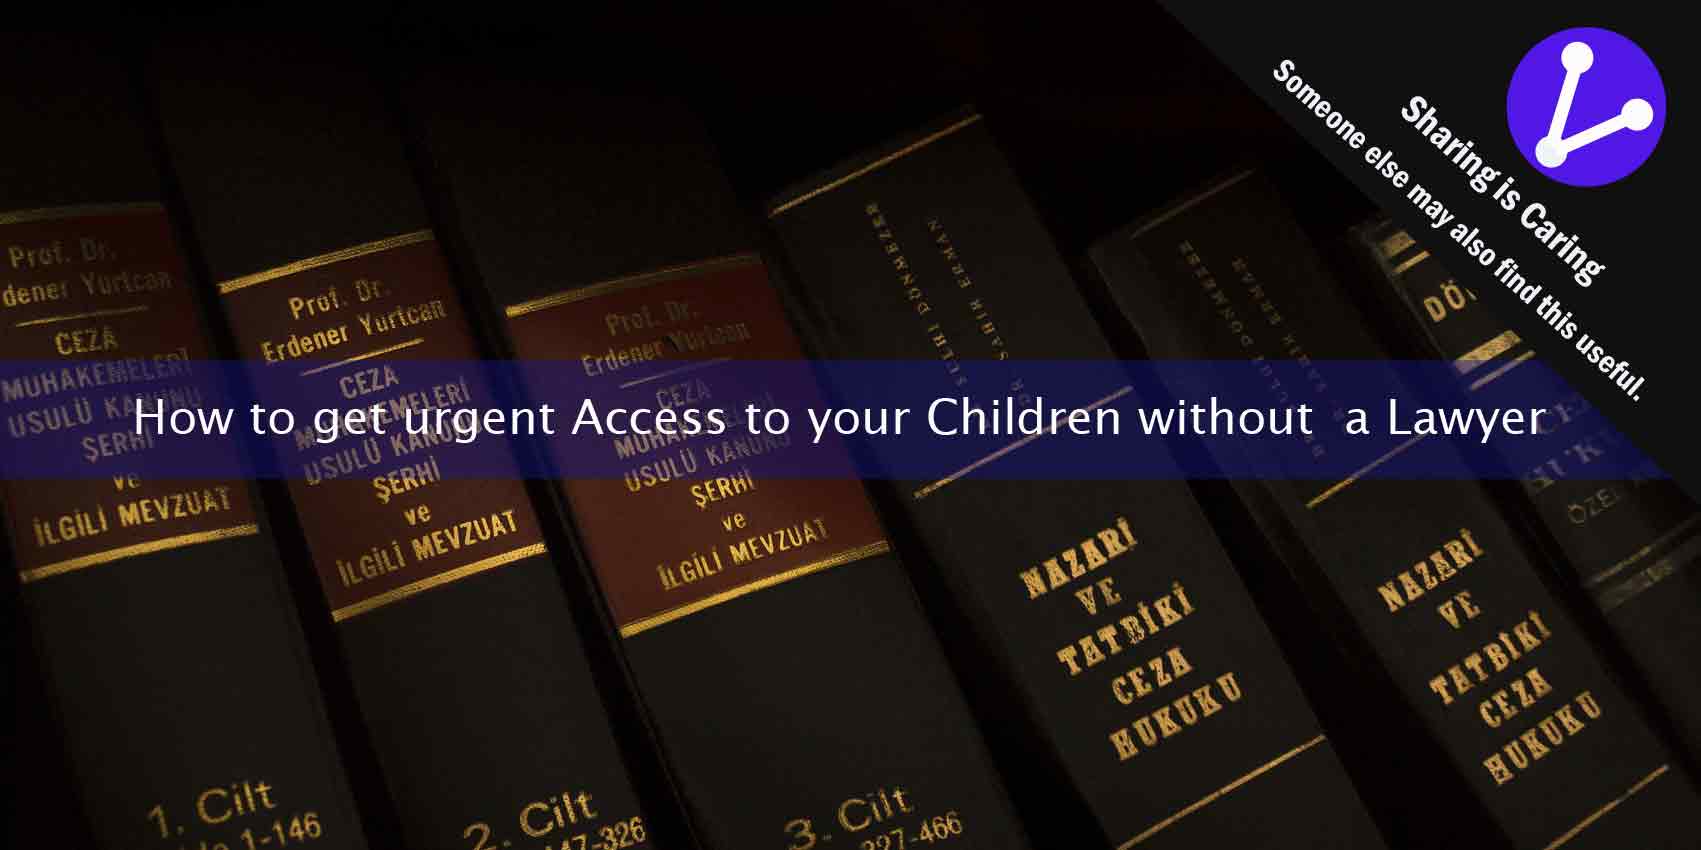 How to get urgent Access to your Children without the services of a Lawyer